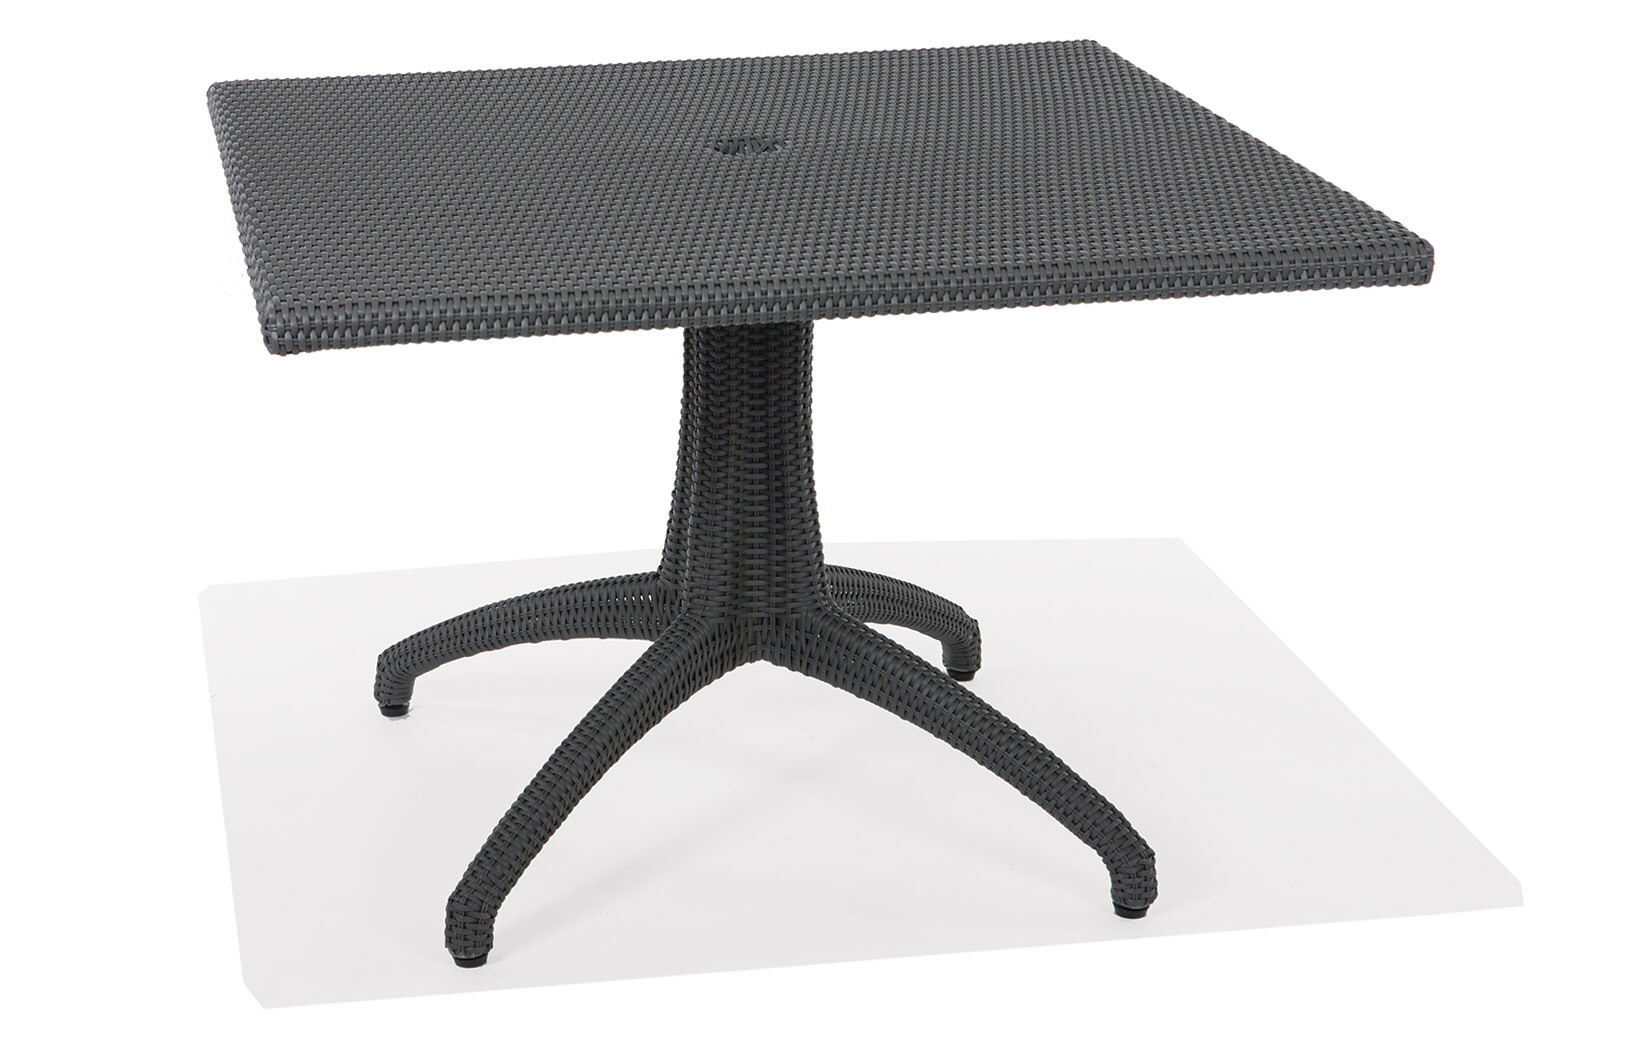 Lantana Collection 42 Inch Square Dining Table